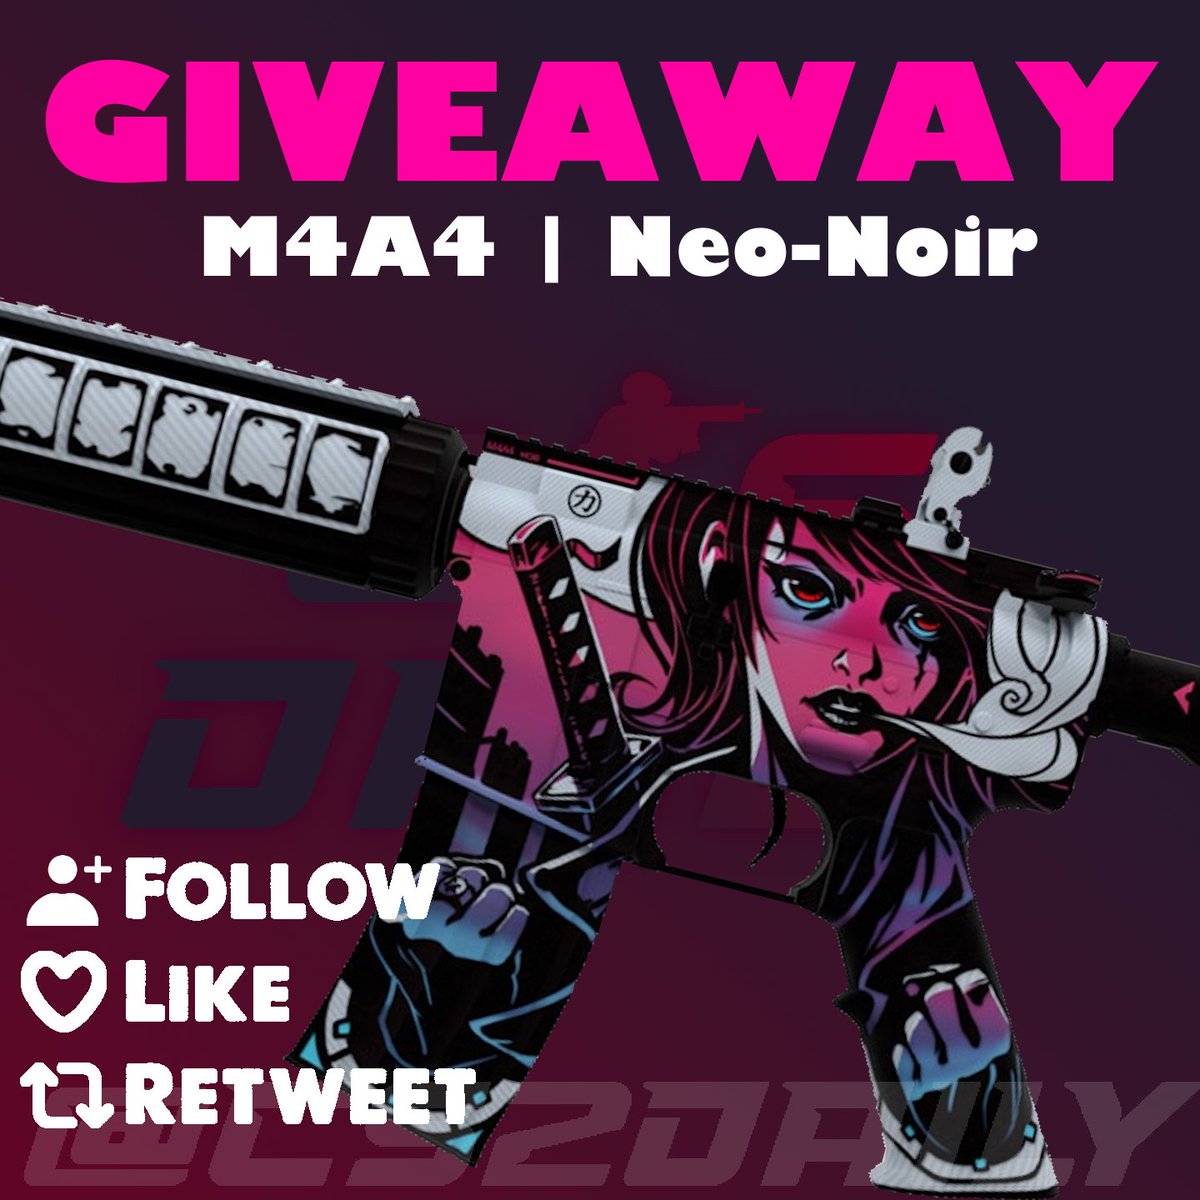 💸 CS2 GIVEAWAY 💸 🎁 M4A4 | Neo-Noir ft. ✅ Follow @CS2Daily ❤️ Like + RT 🔁 💬 Comment Ends in 3 days⏰ Good Luck 🍀 #CS2 #CounterStrike #CSGOGiveaway #CS2Giveaway #CS2Skins #csgoskins